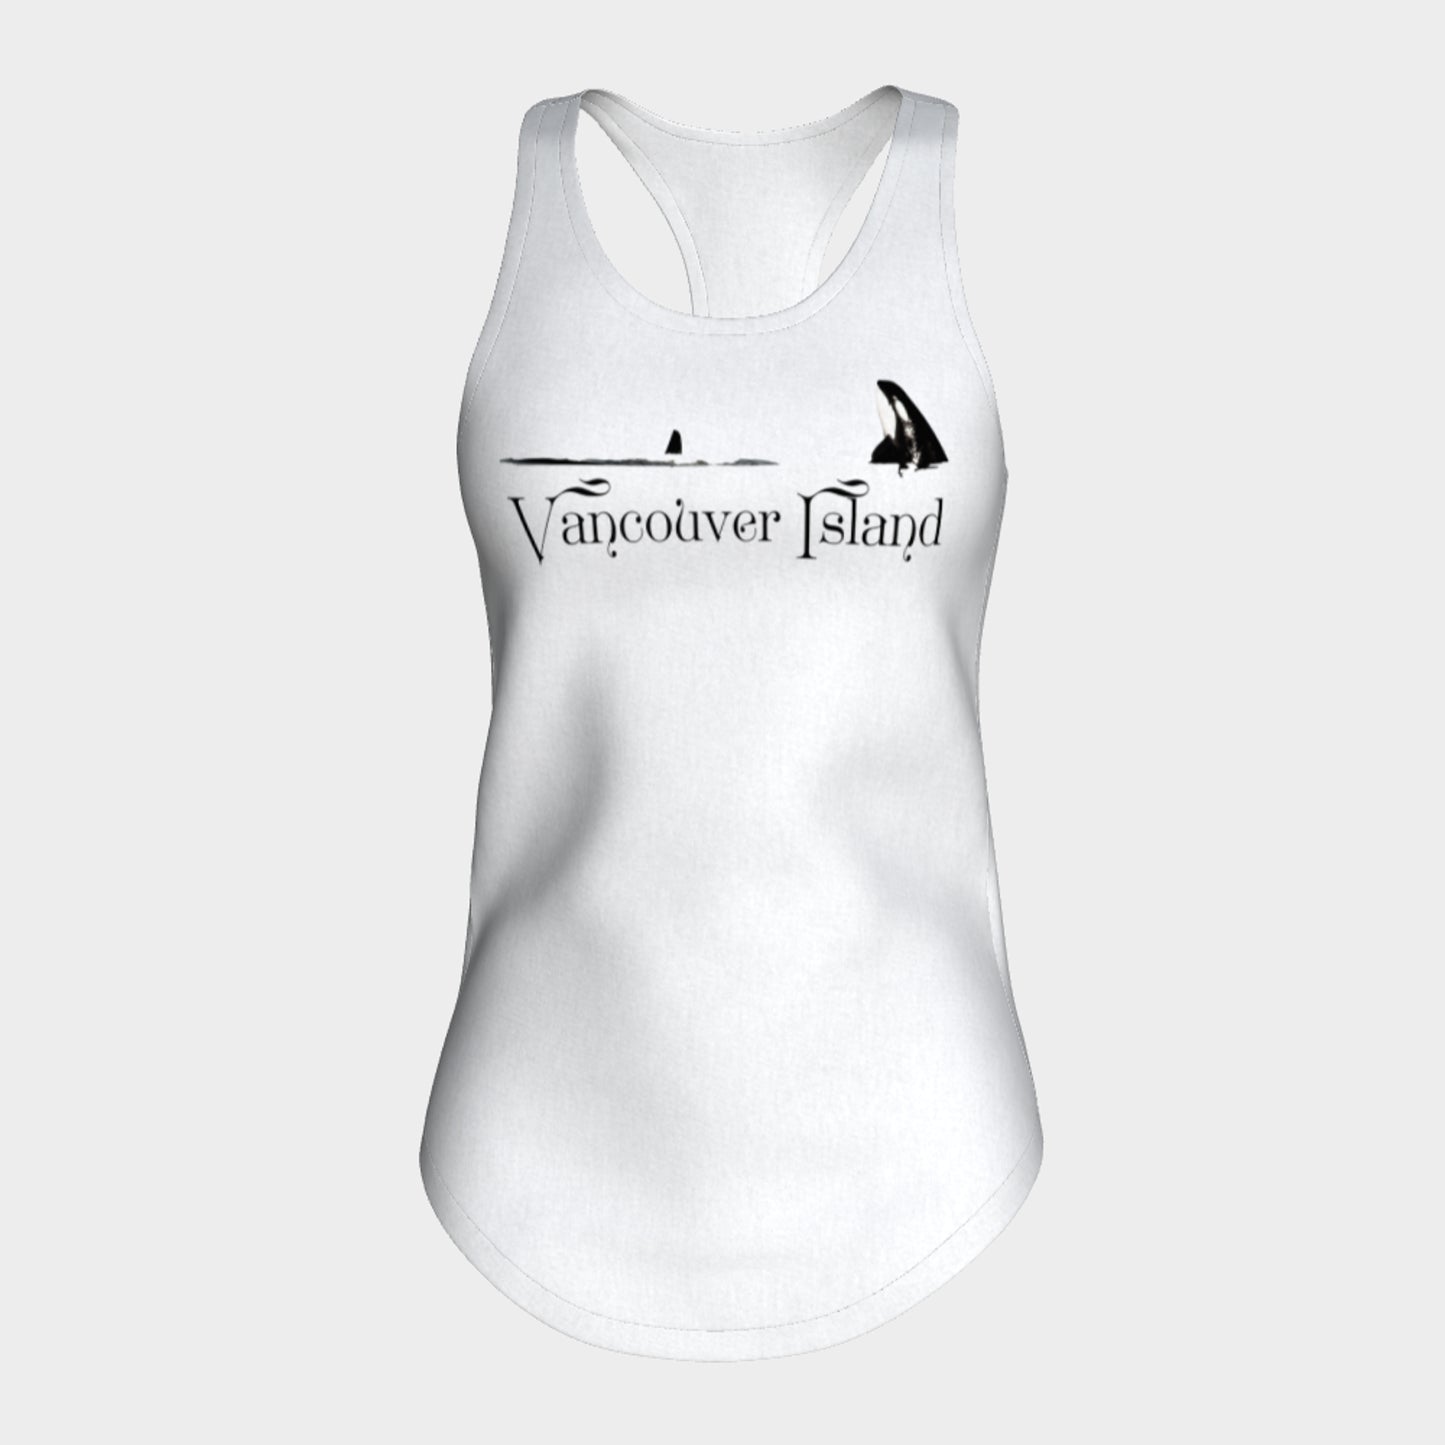 Orca Spy Hop Vancouver Island Racerback Tank Top  Excellent choice for the summer or for working out.   Made from 60% spun cotton and 40% poly for a mix of comfort and performance, you get it all (including my photography and digital art) with this custom printed racerback tank top.   Van Isle Goddess Next Level racerback tank top will quickly become you go-to tank top because of the super comfy fit!